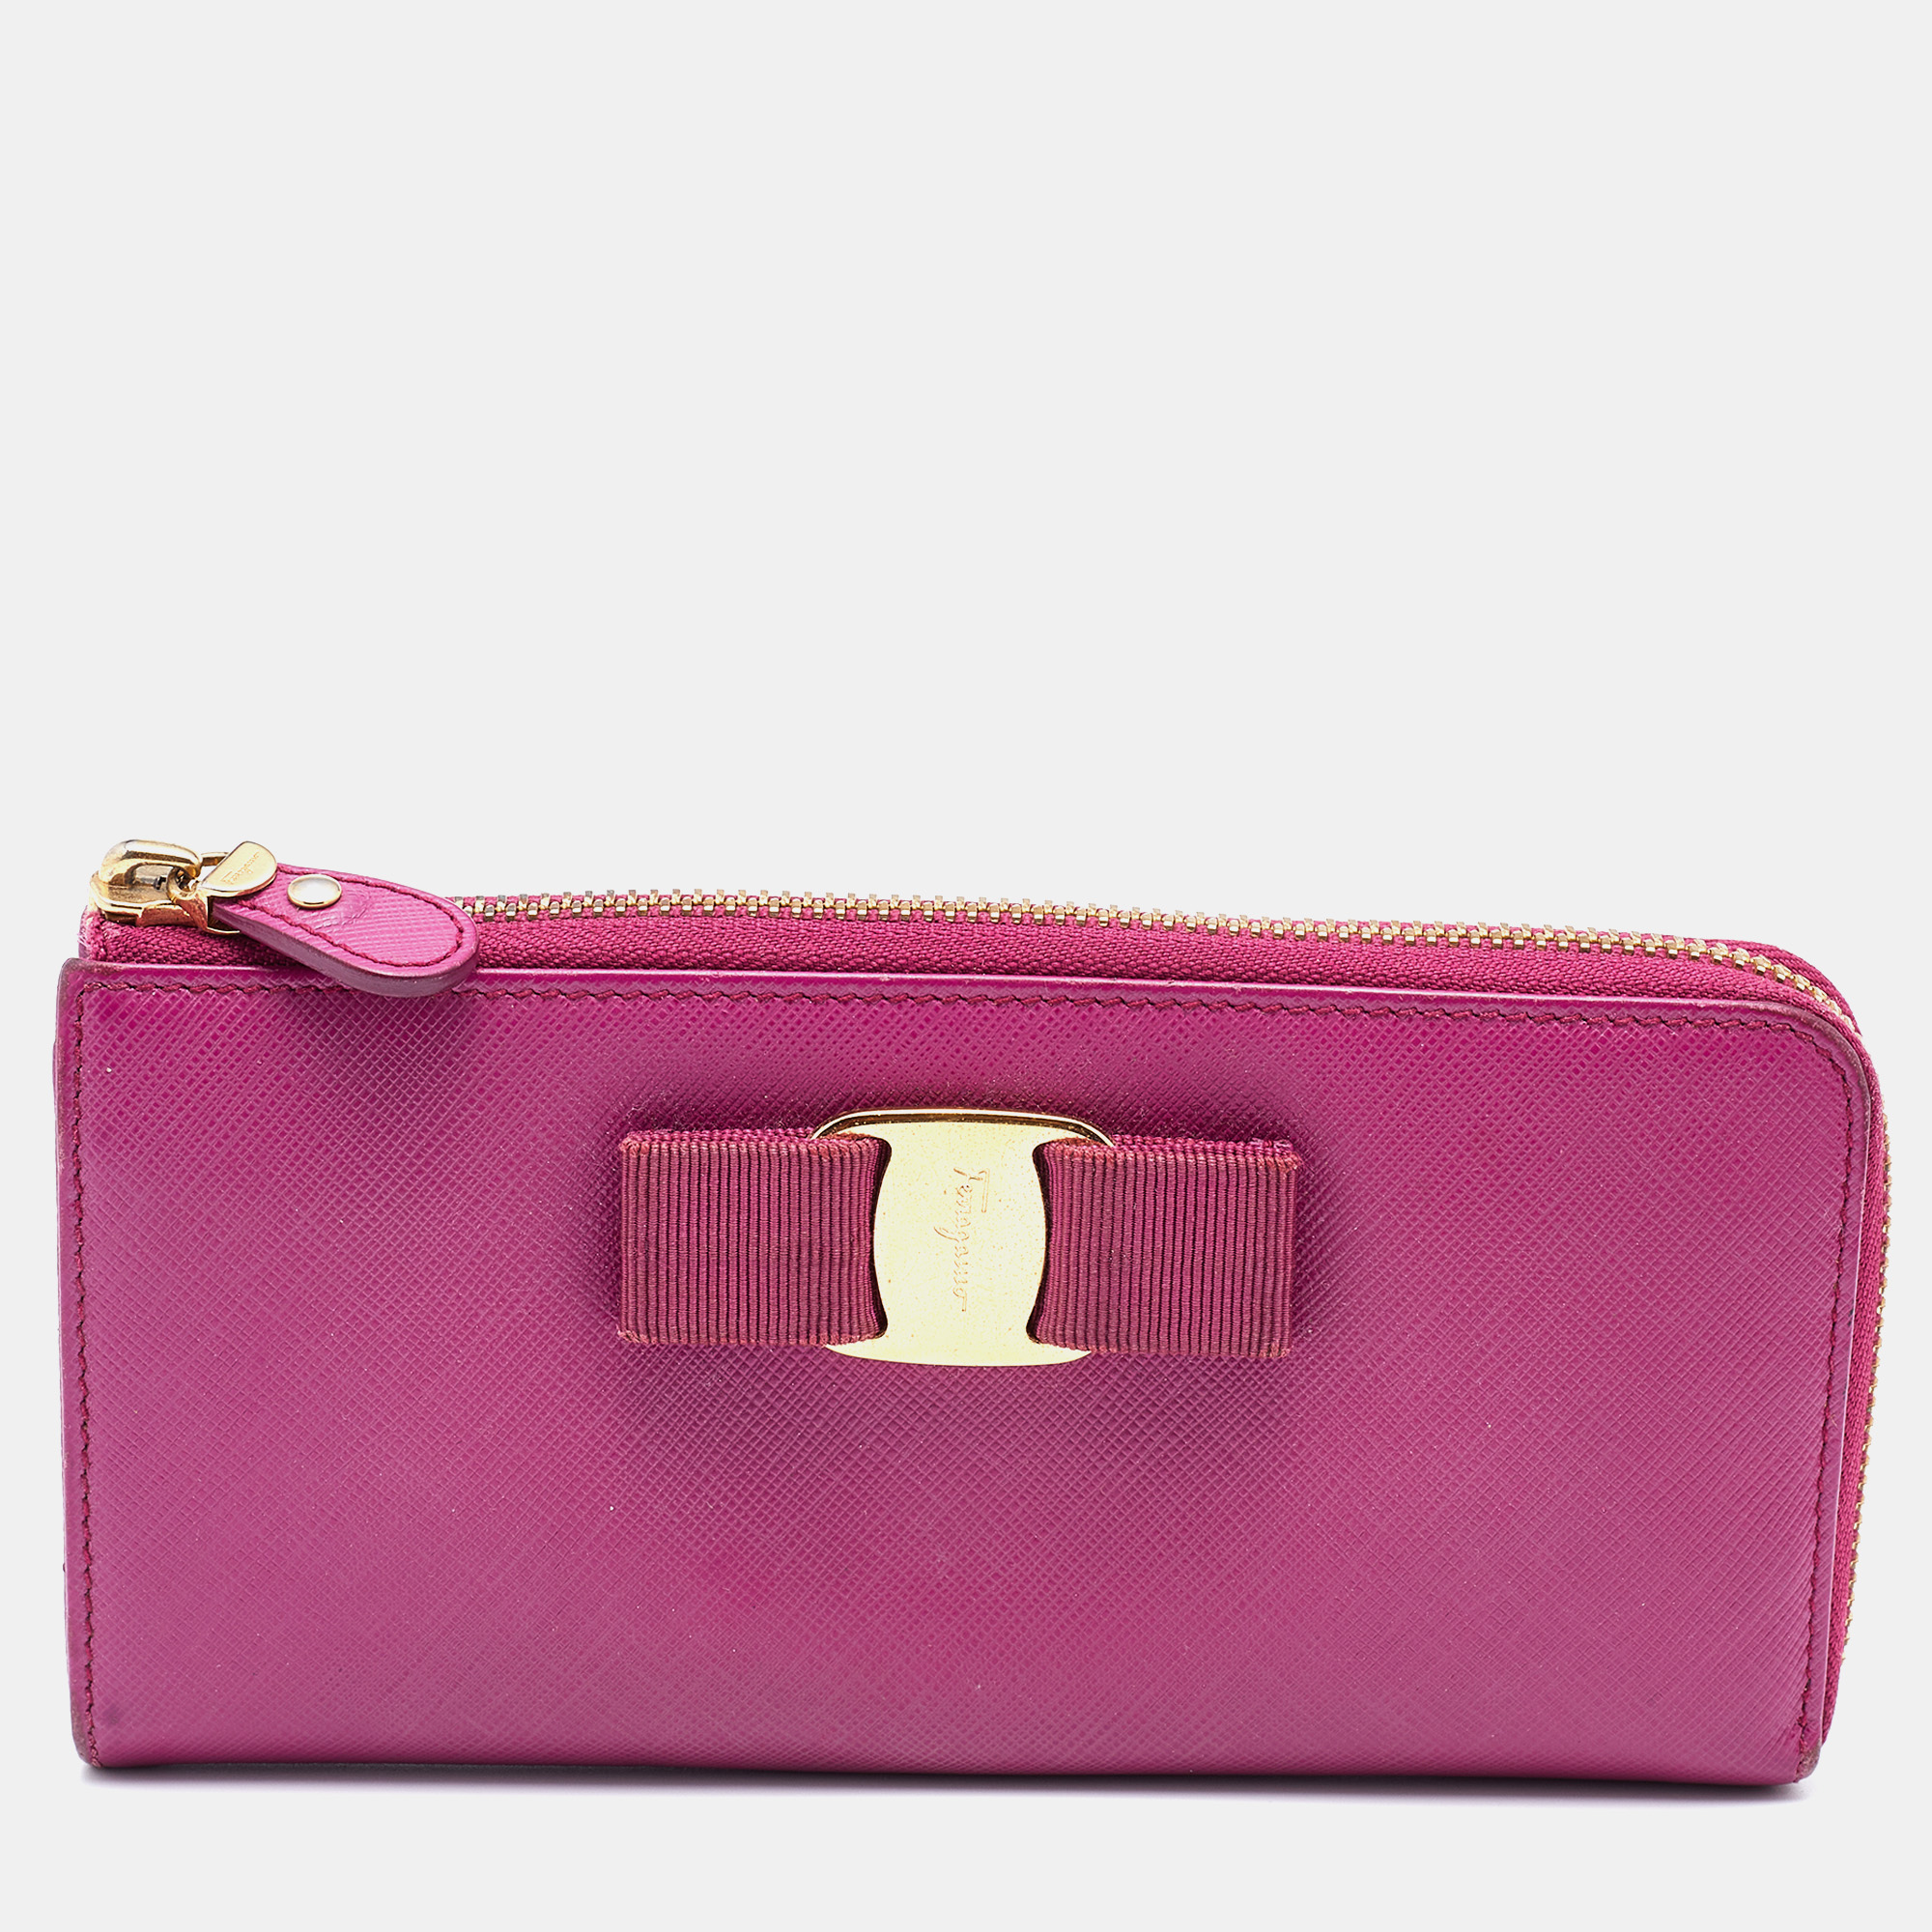 Pre-owned Ferragamo Pink Saffiano Leather Vara Bow Zip Continental Wallet